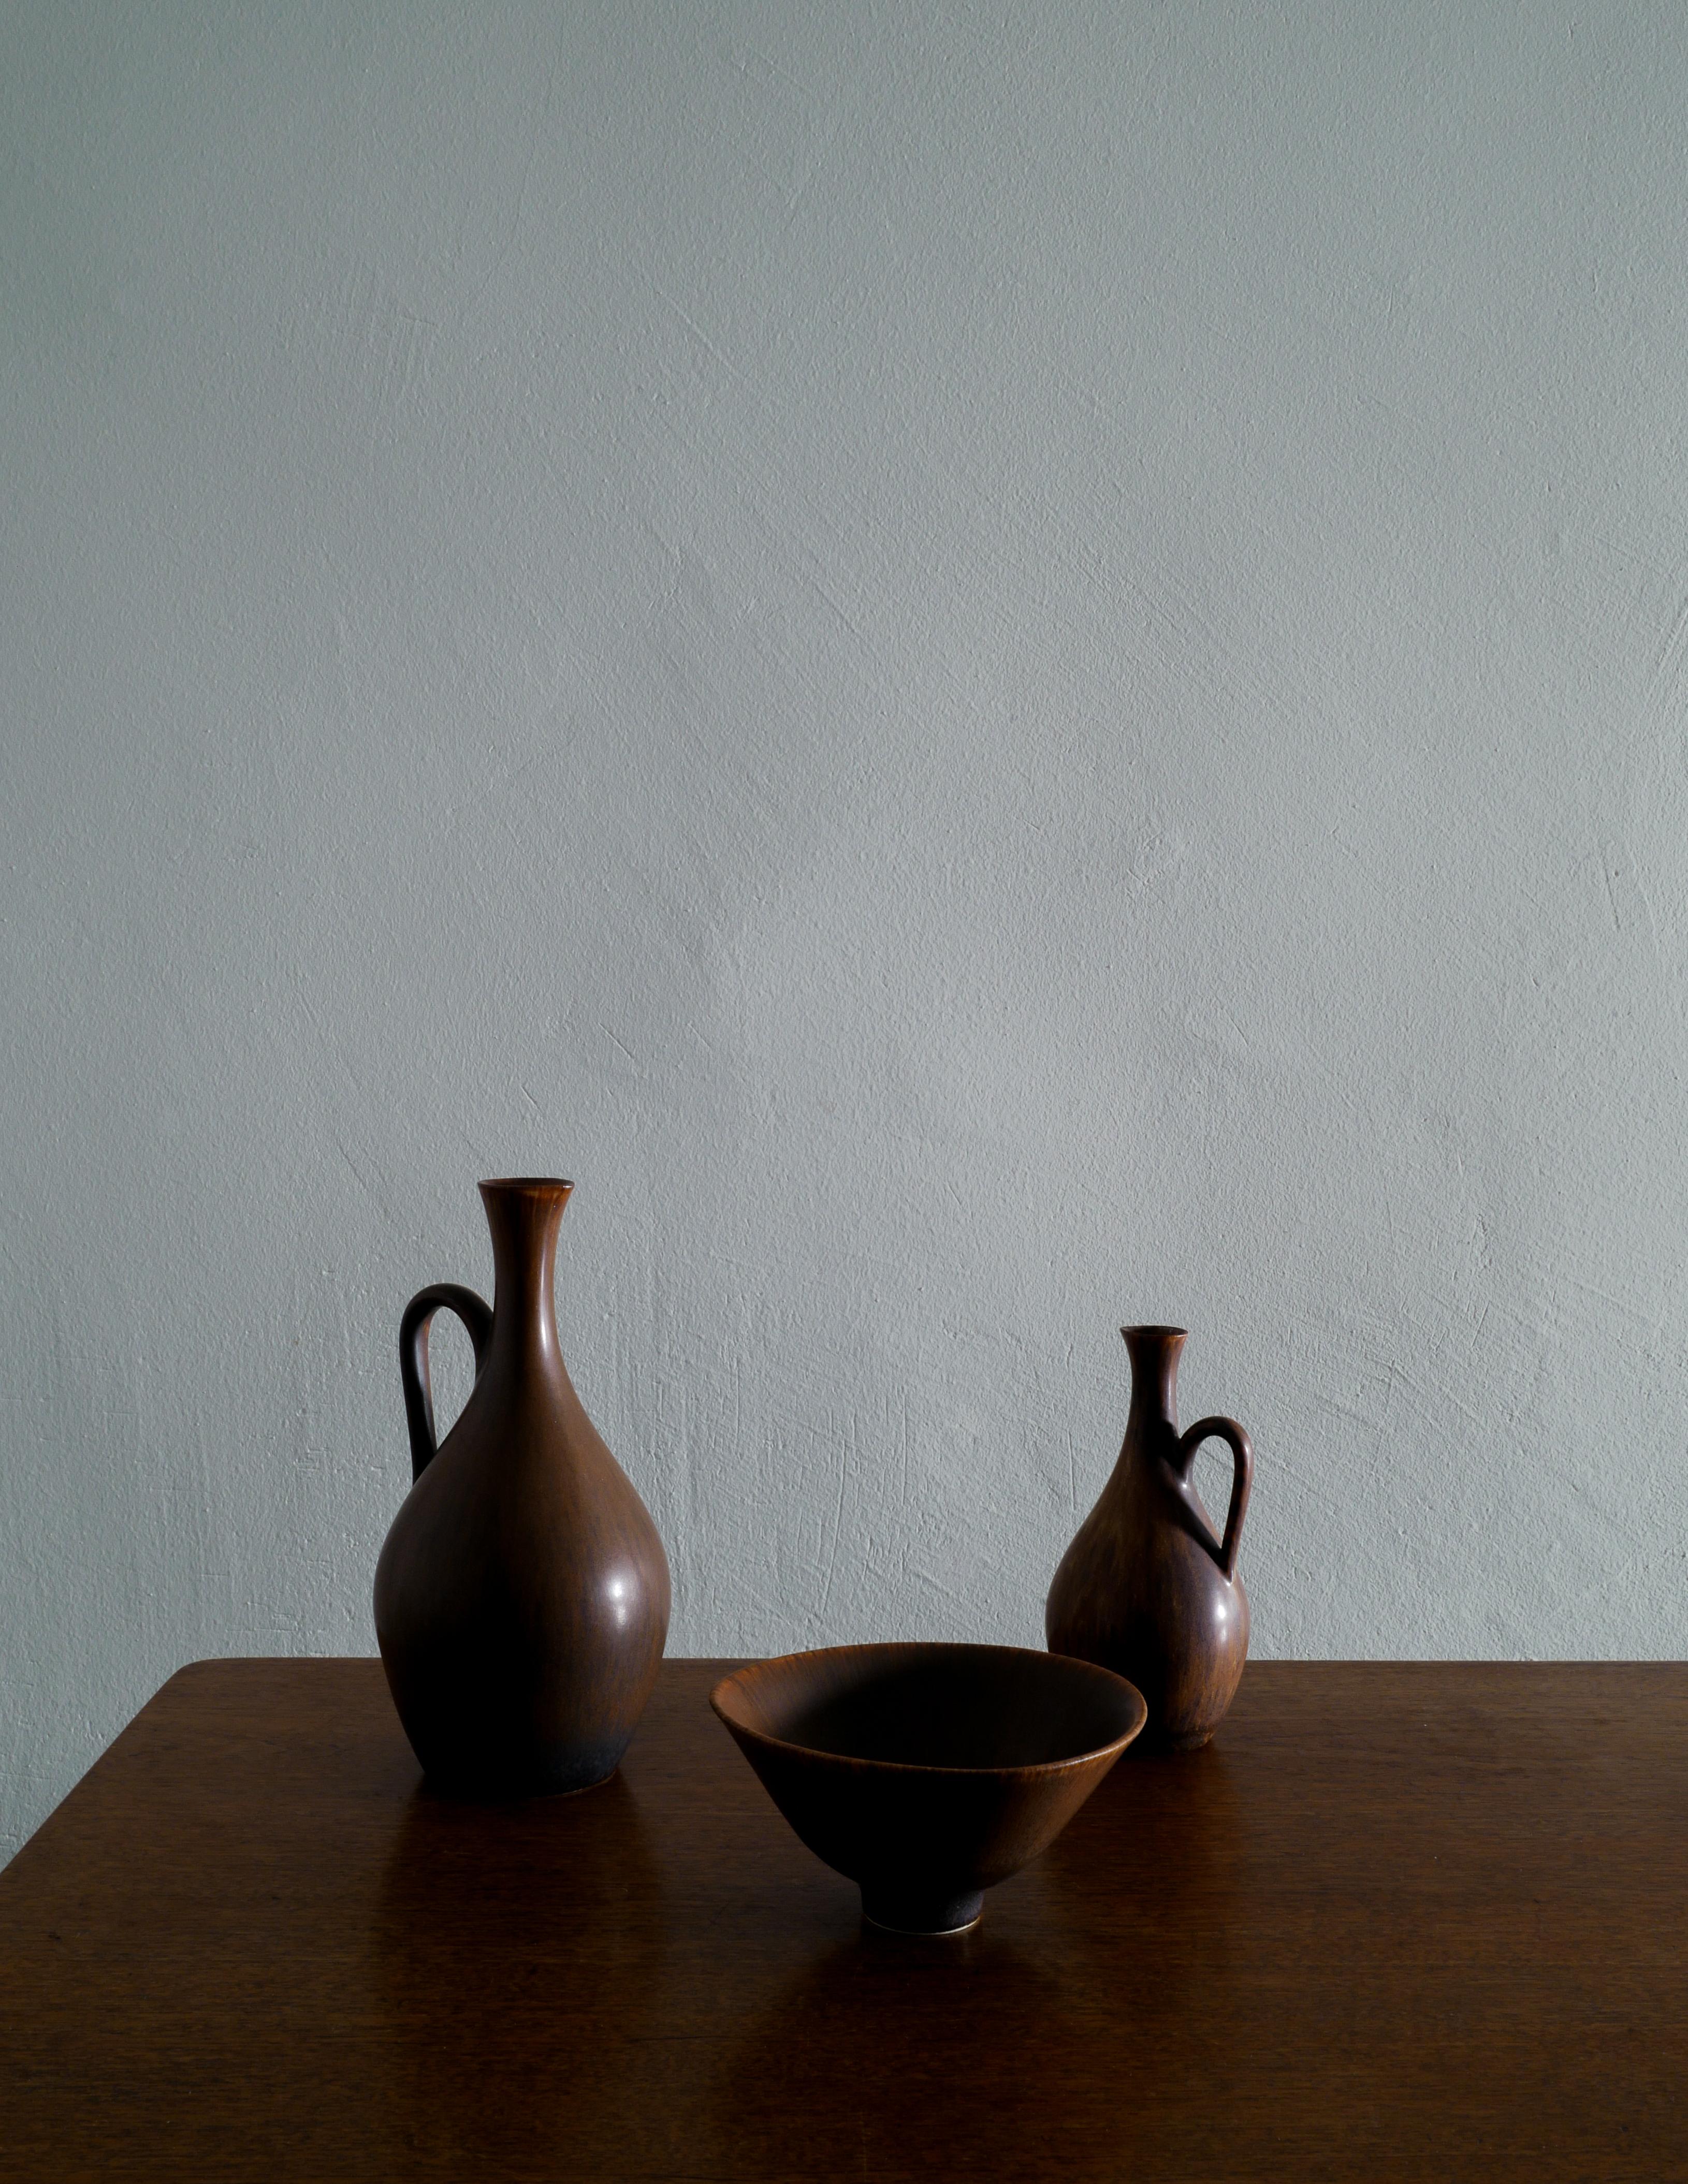 Rare set of ceramics by Carl-Harry Stålhane in a brown glaze produced by Rörstrand, Sweden in the 1950s. In good vintage and original condition with minimal signs of use. All signed. 

Dimensions: 
Larger pitcher: H: 23 cm Diameter: 11 cm 
Smaller